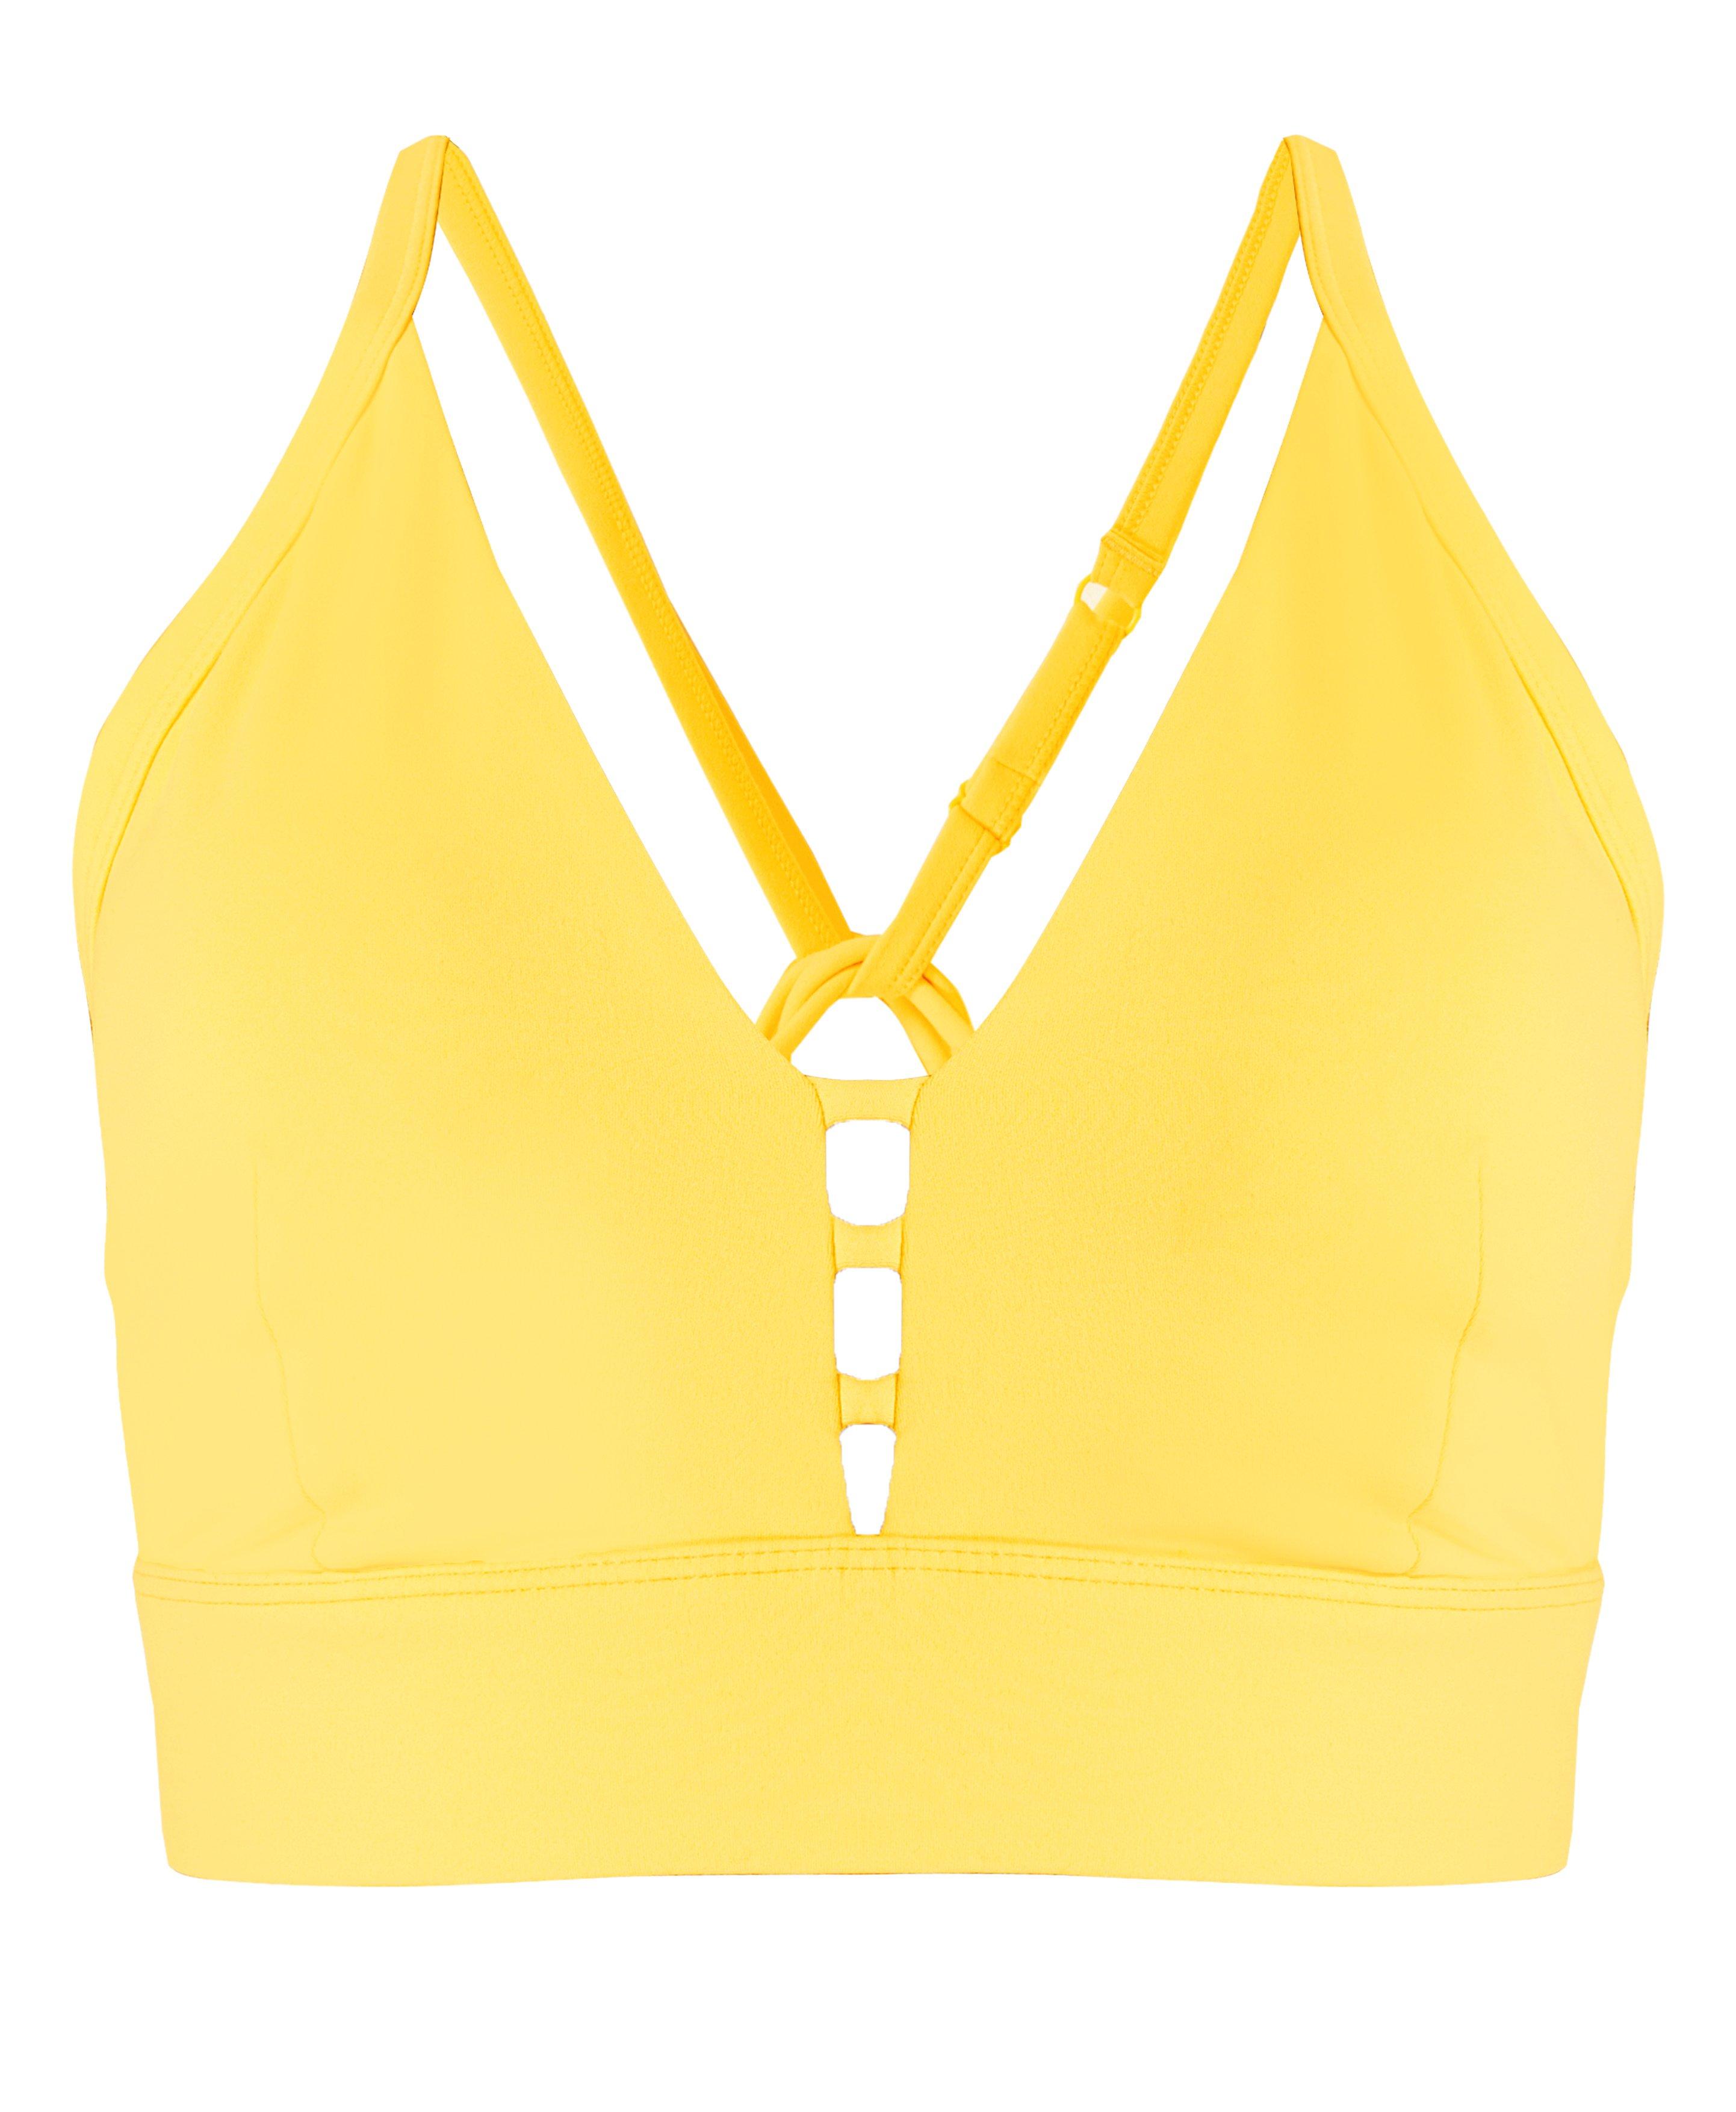 Sweaty Betty Super Soft Strappy Back Bra  Anthropologie Hong Kong -  Women's Clothing, Accessories & Home